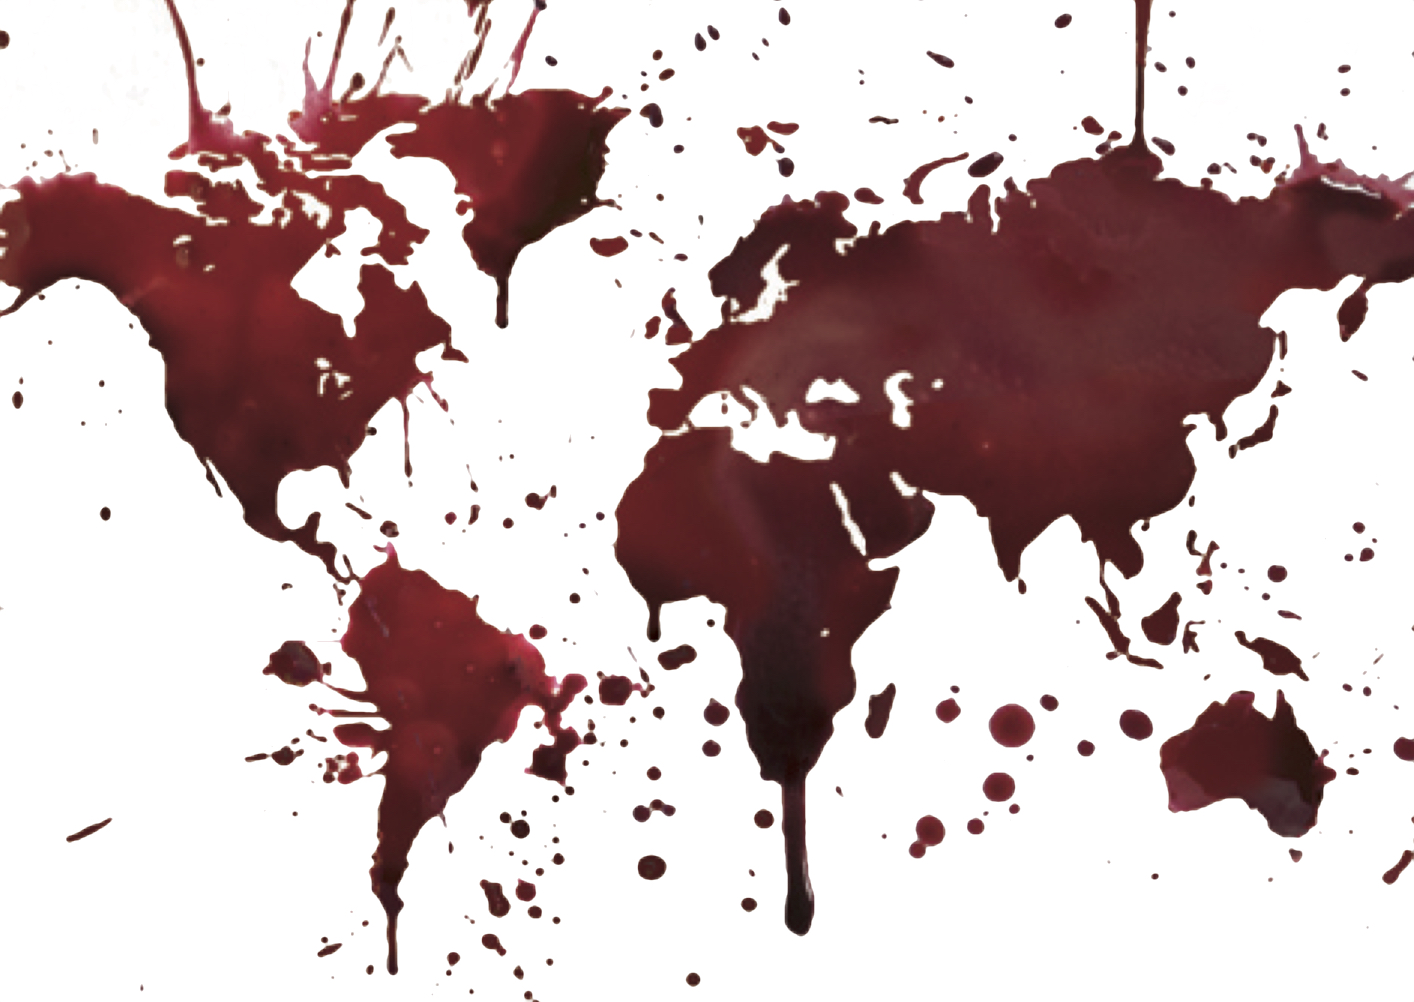 Hate filled world map